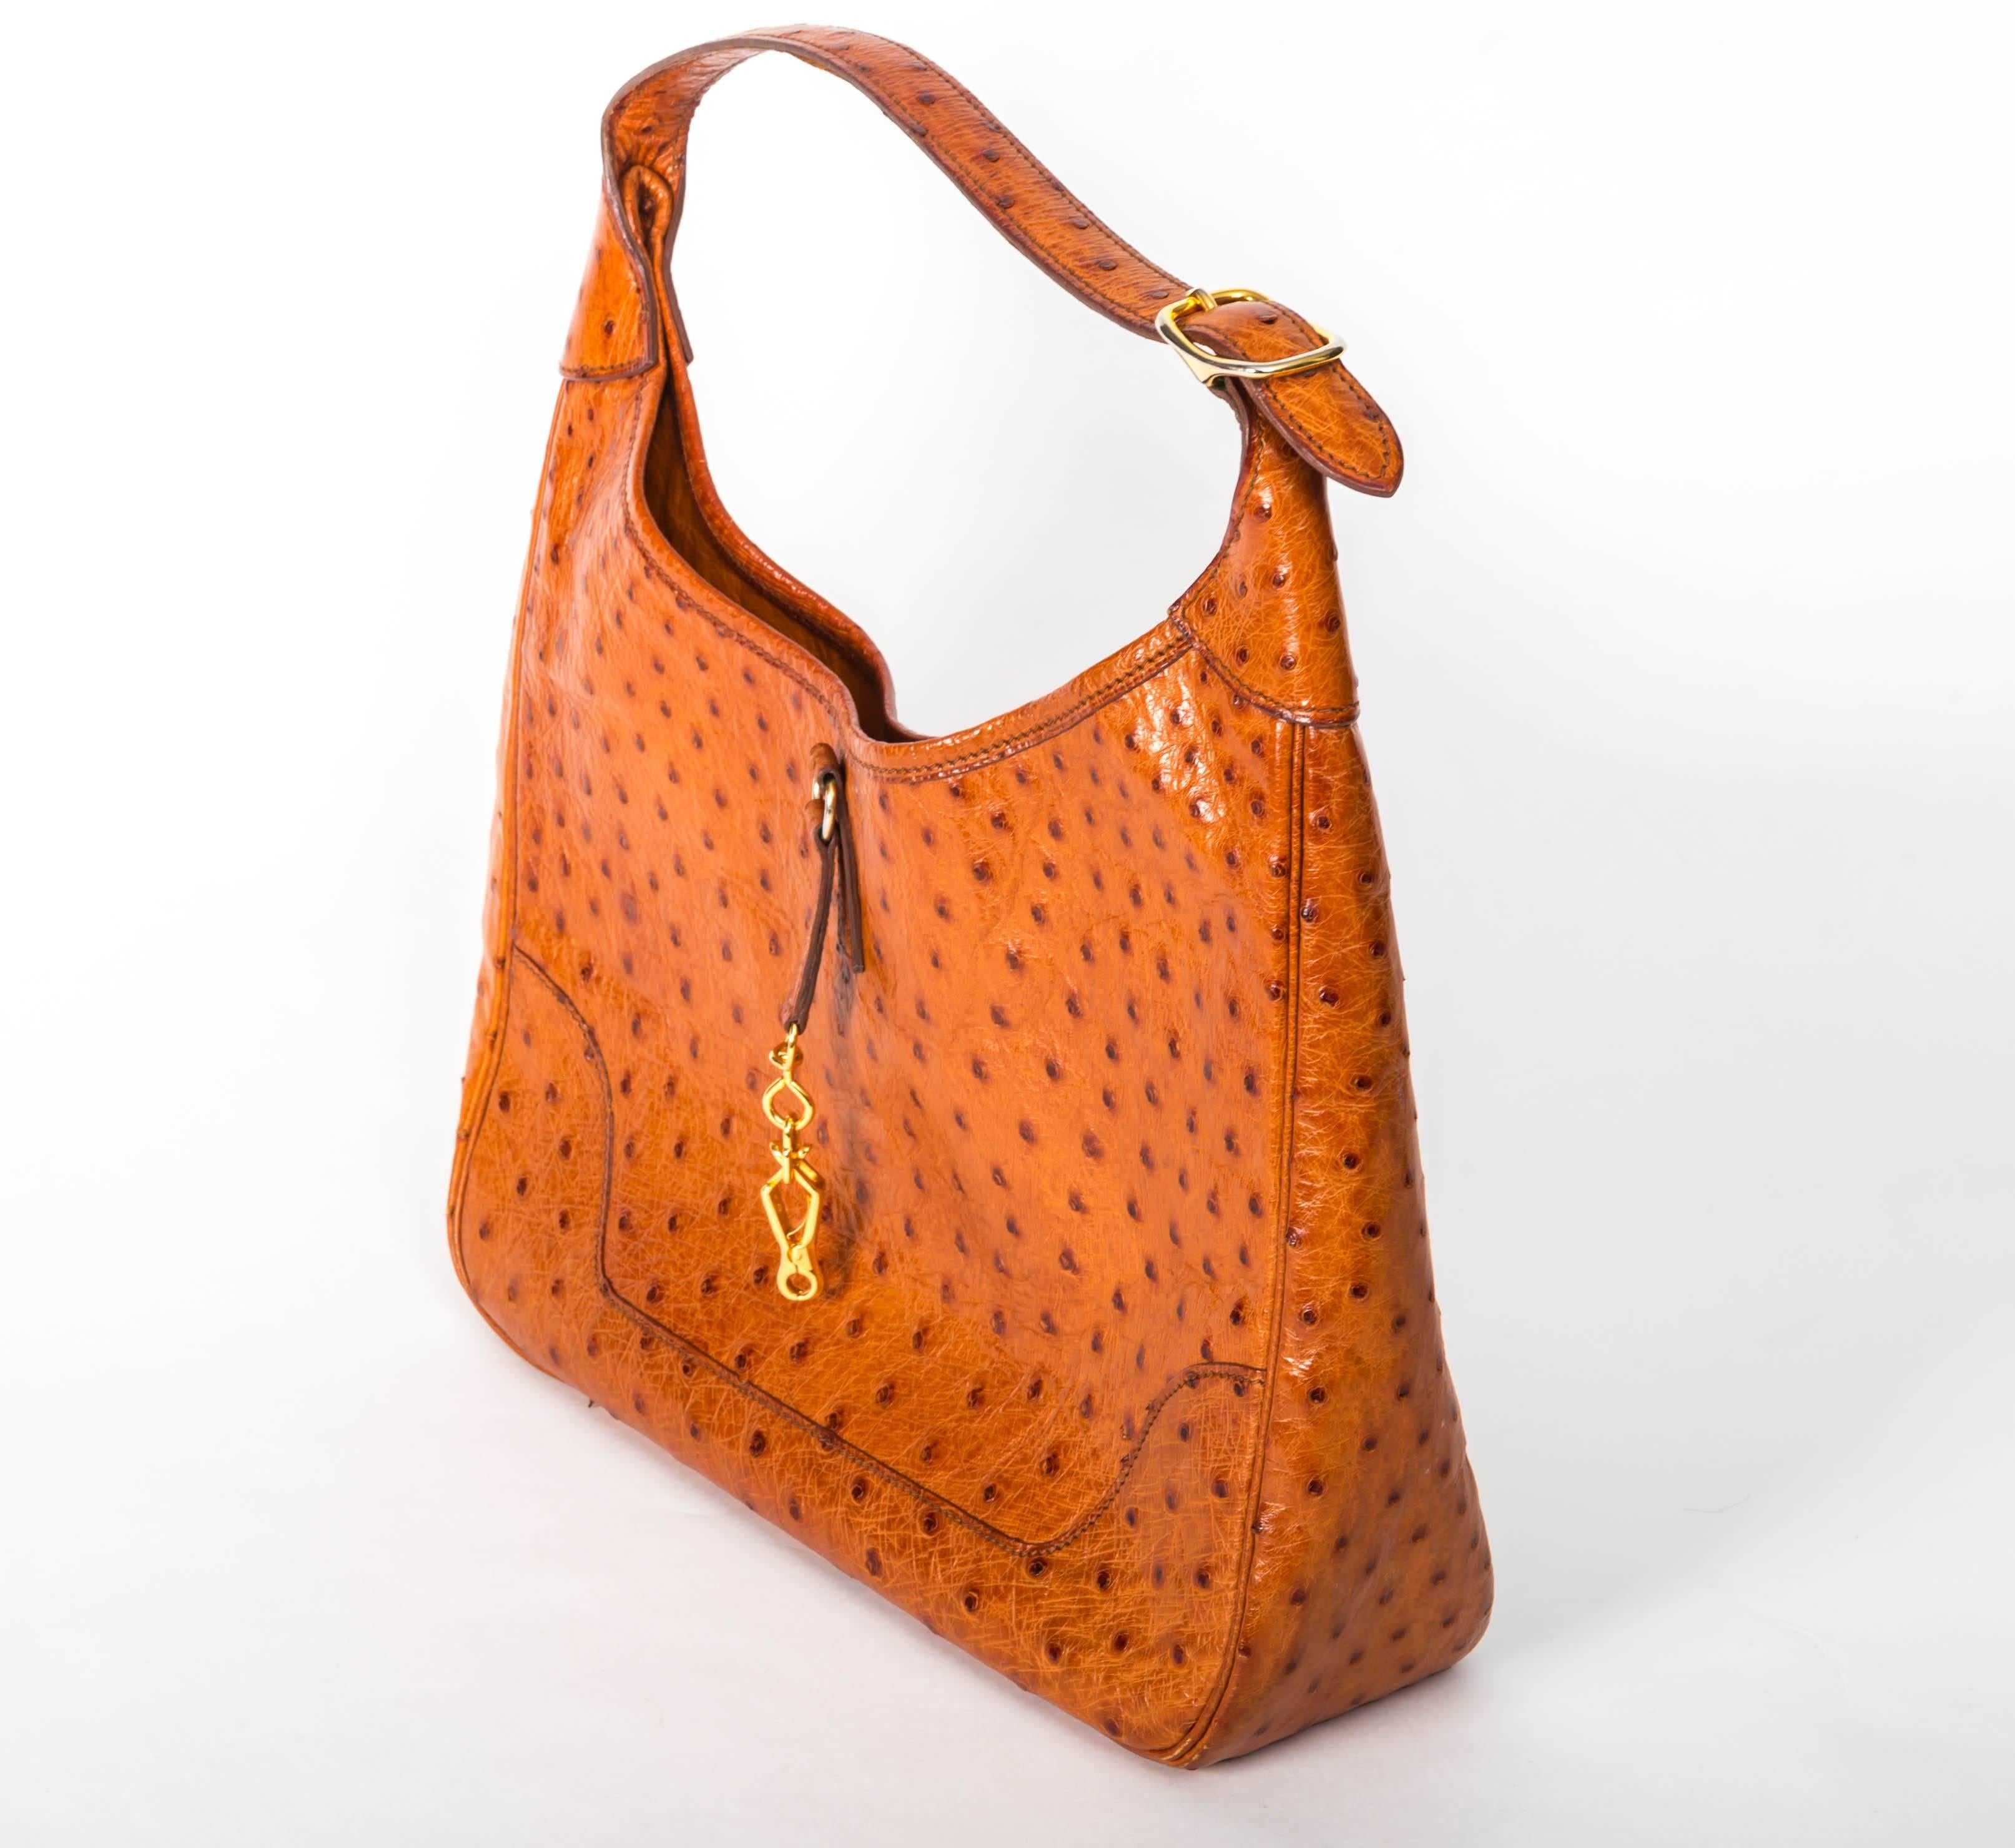 Vintage Hermes Trim Bag in Tan Ostrich Skin with Gold Hardware
Condition is Excellent
This Bag is stamped N in a Circle denoting the year 1984
We do not have the CITES certificate for this bag and are therefore unable to export outside the